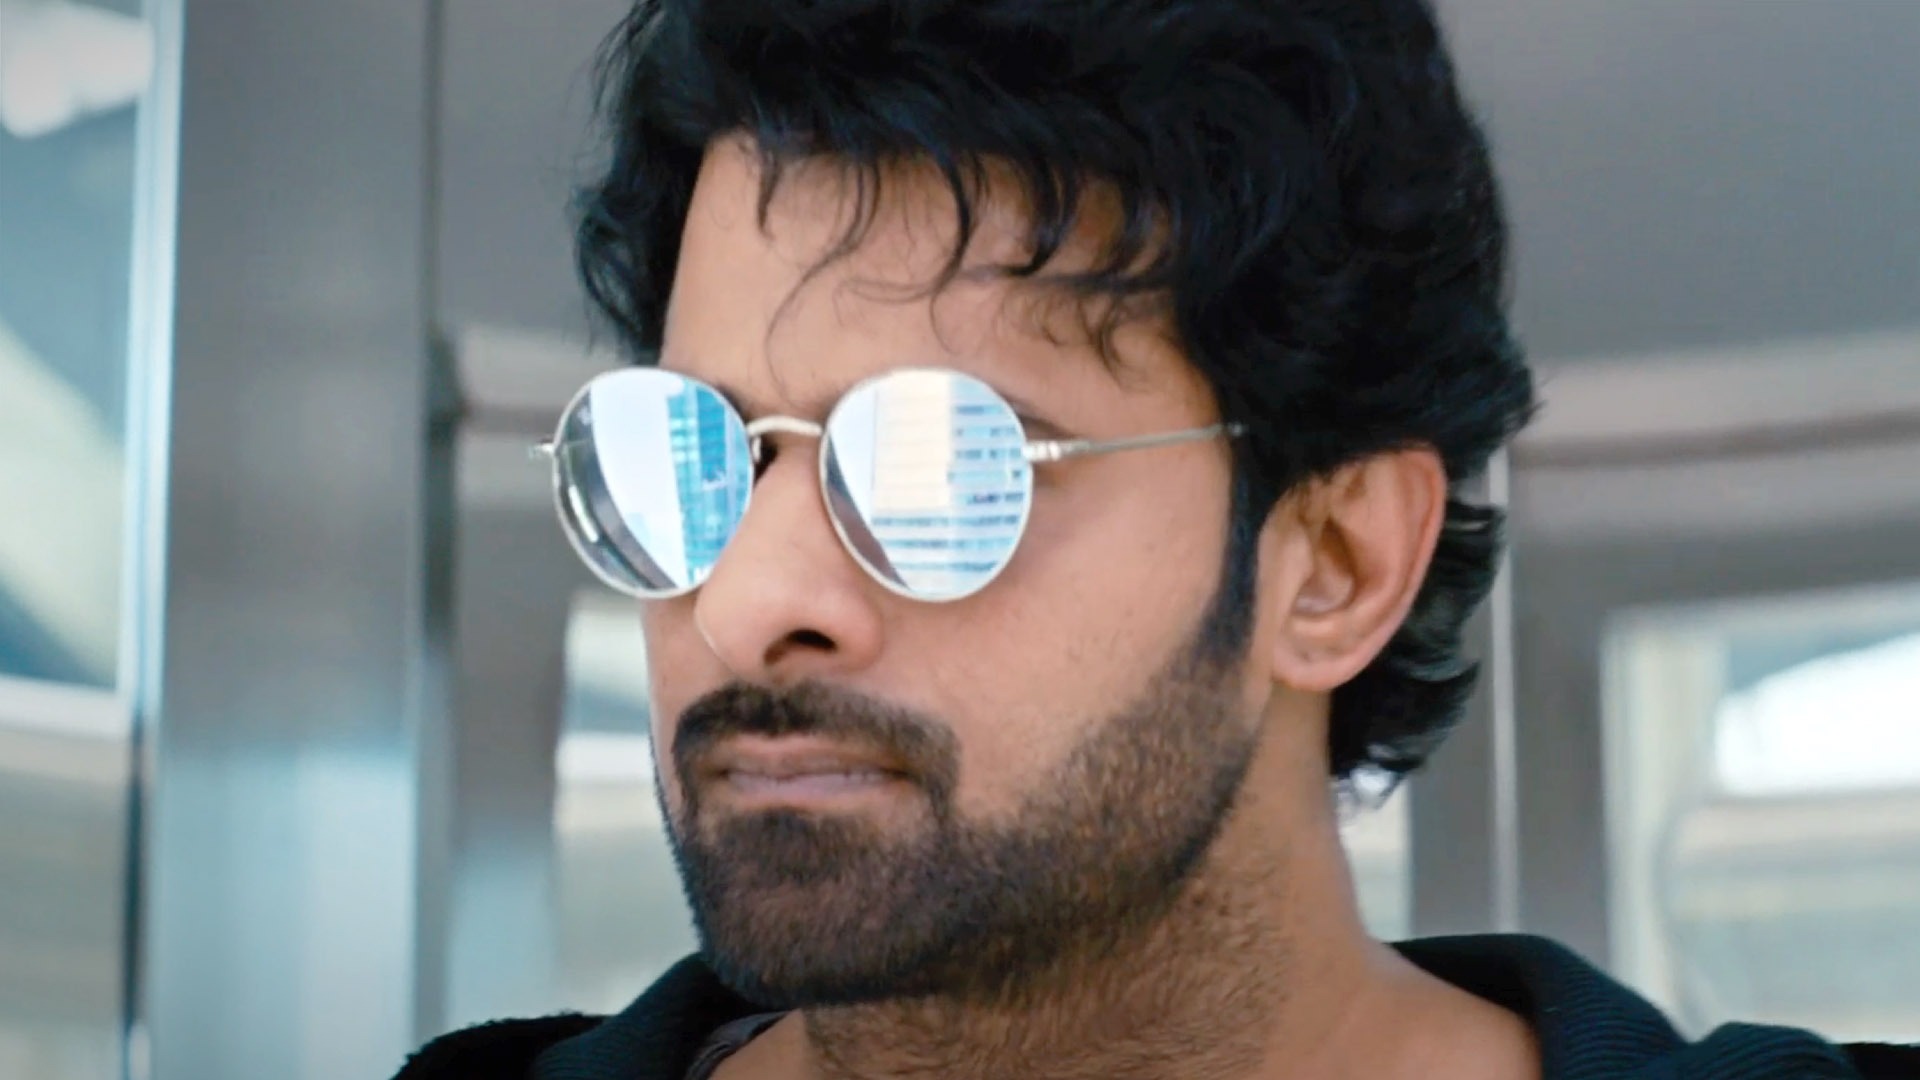 Shades of Saaho chapter 2 records HIGHEST viewership! | India Forums